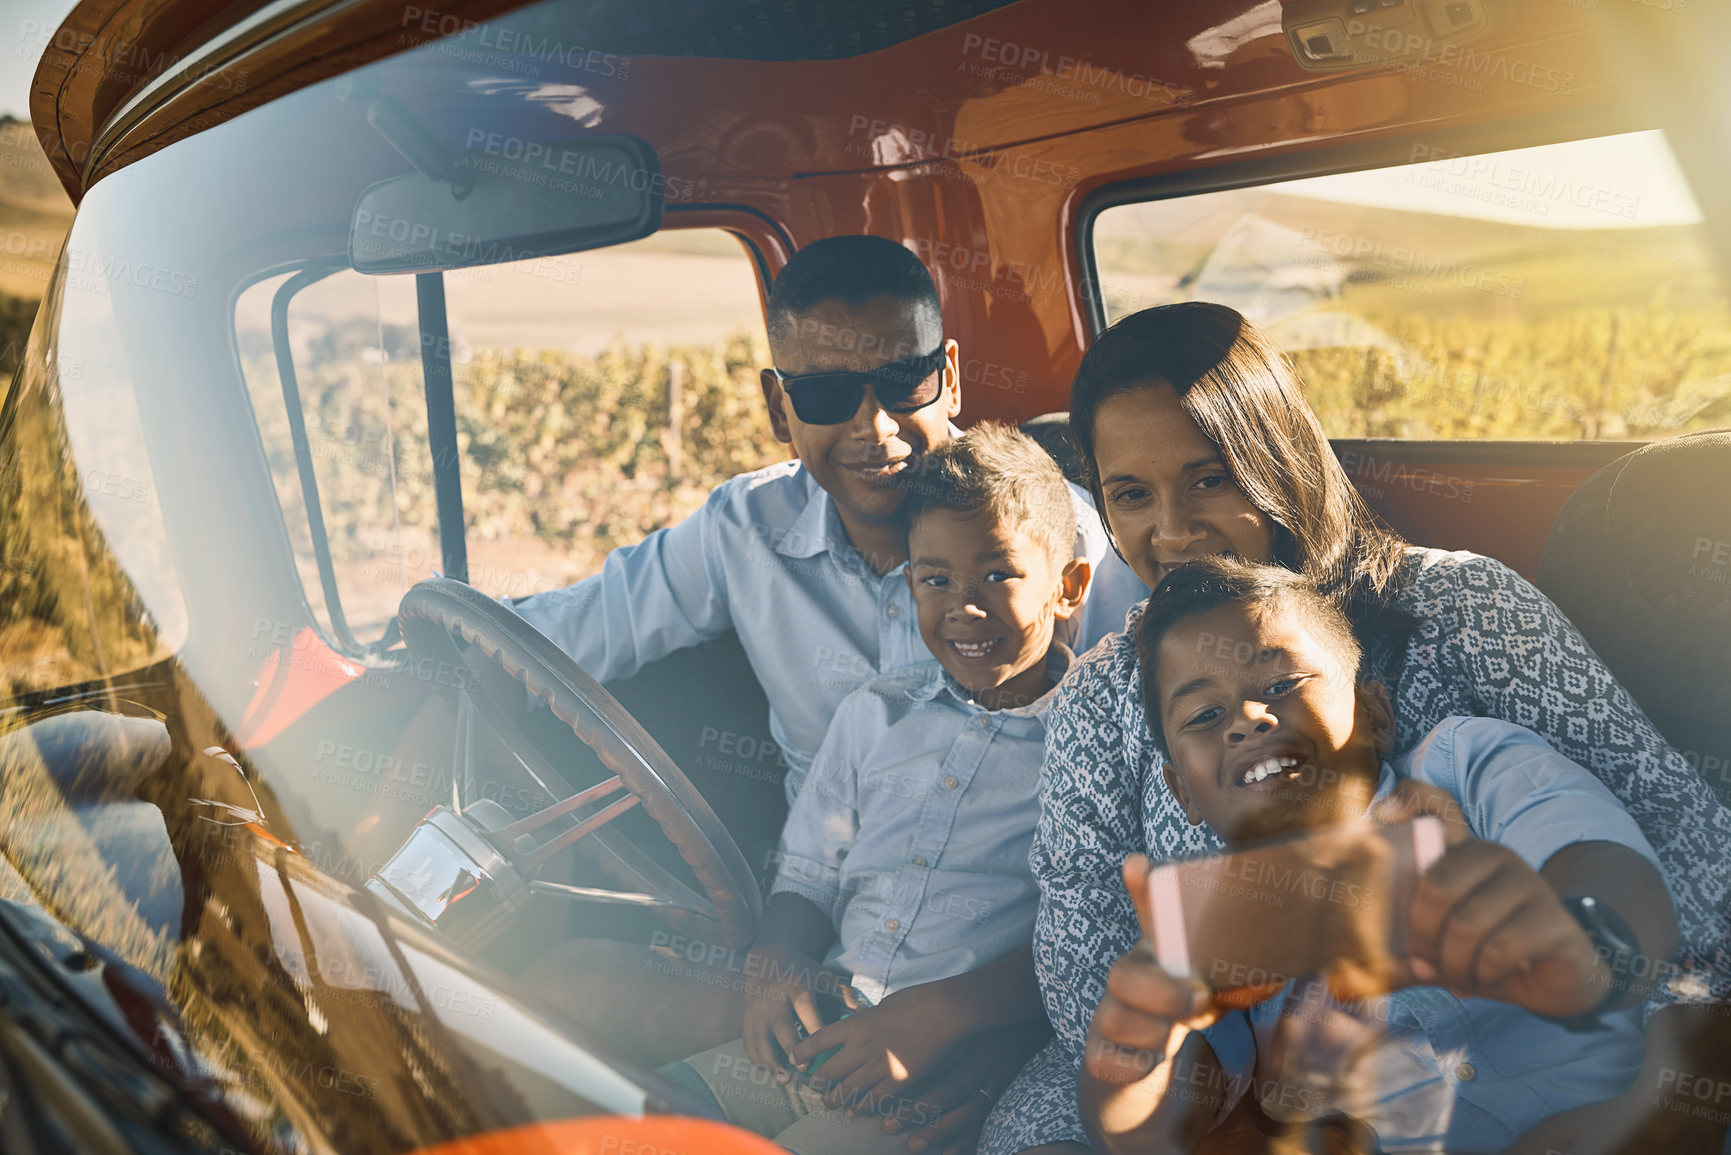 Buy stock photo Shot of a cheerful young family driving in a red pickup truck on a rural road while taking a self portrait on a cellphone together